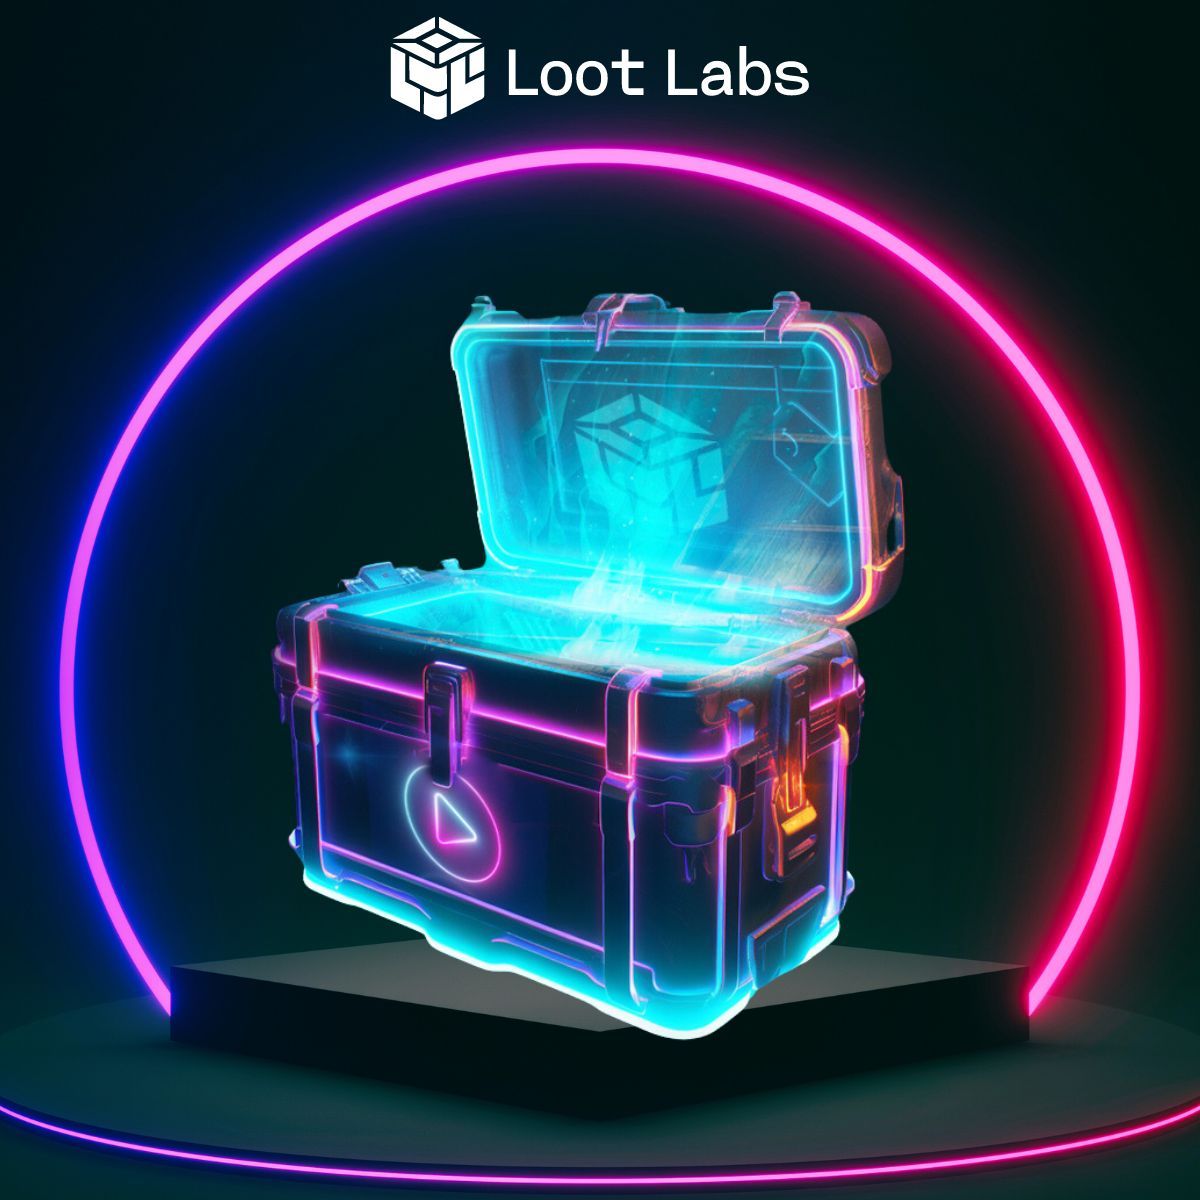 The Gaming Revolution is Upon us: What is LootLabs?